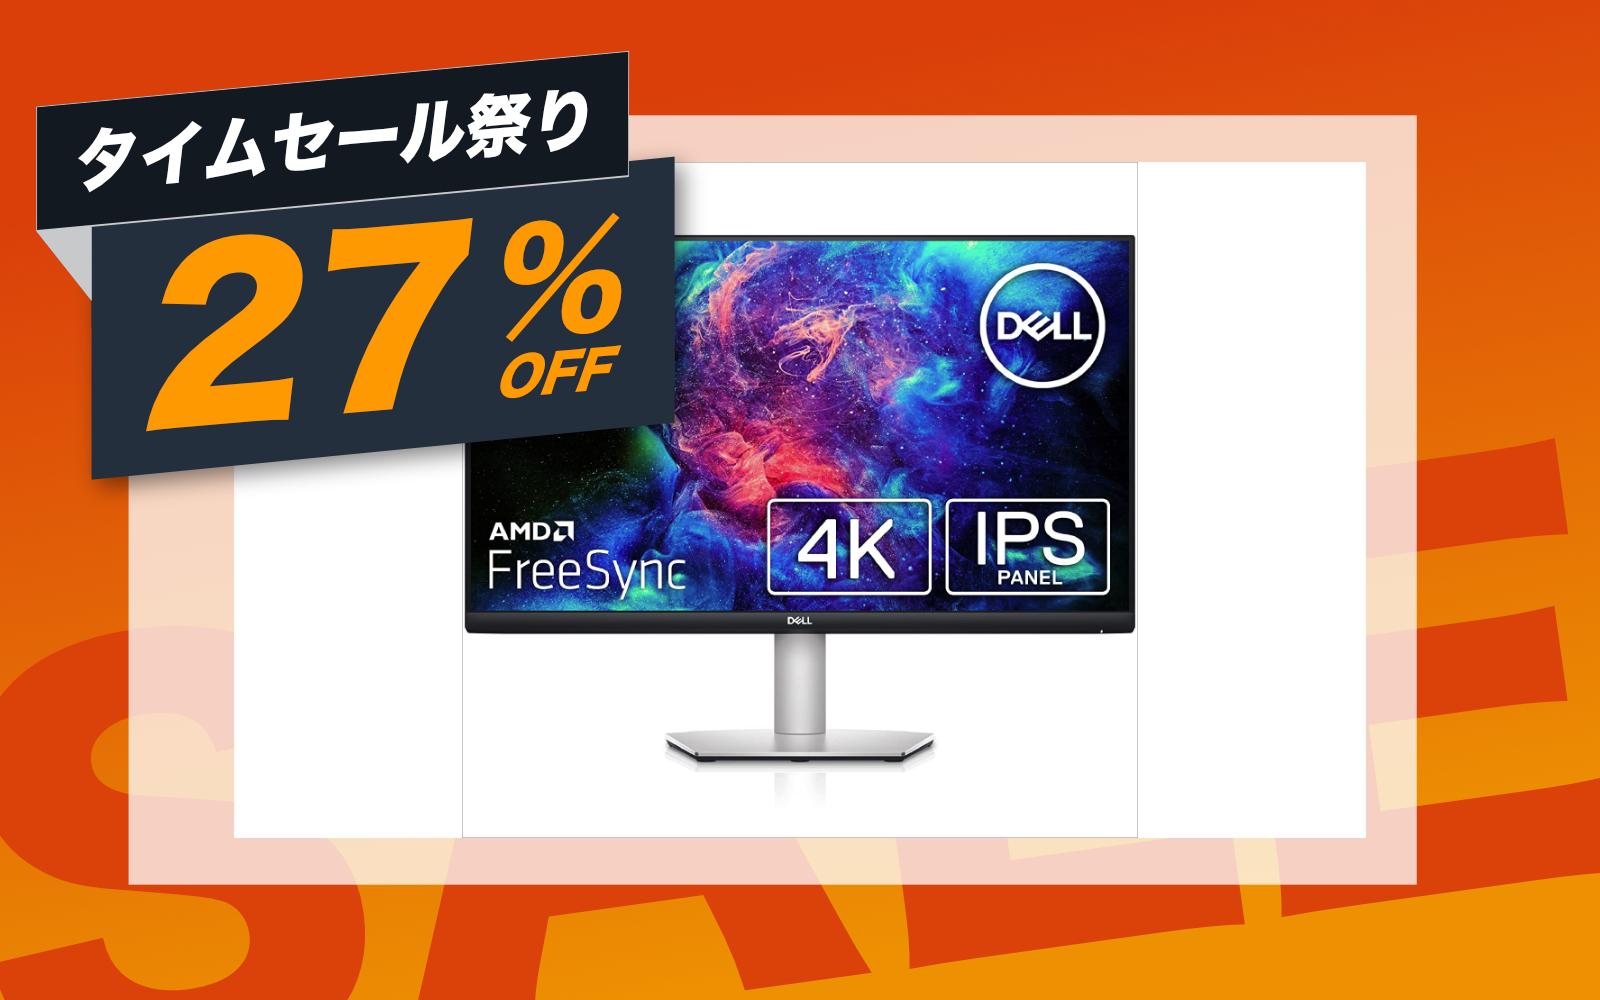 DELL 4k 27inch display sale